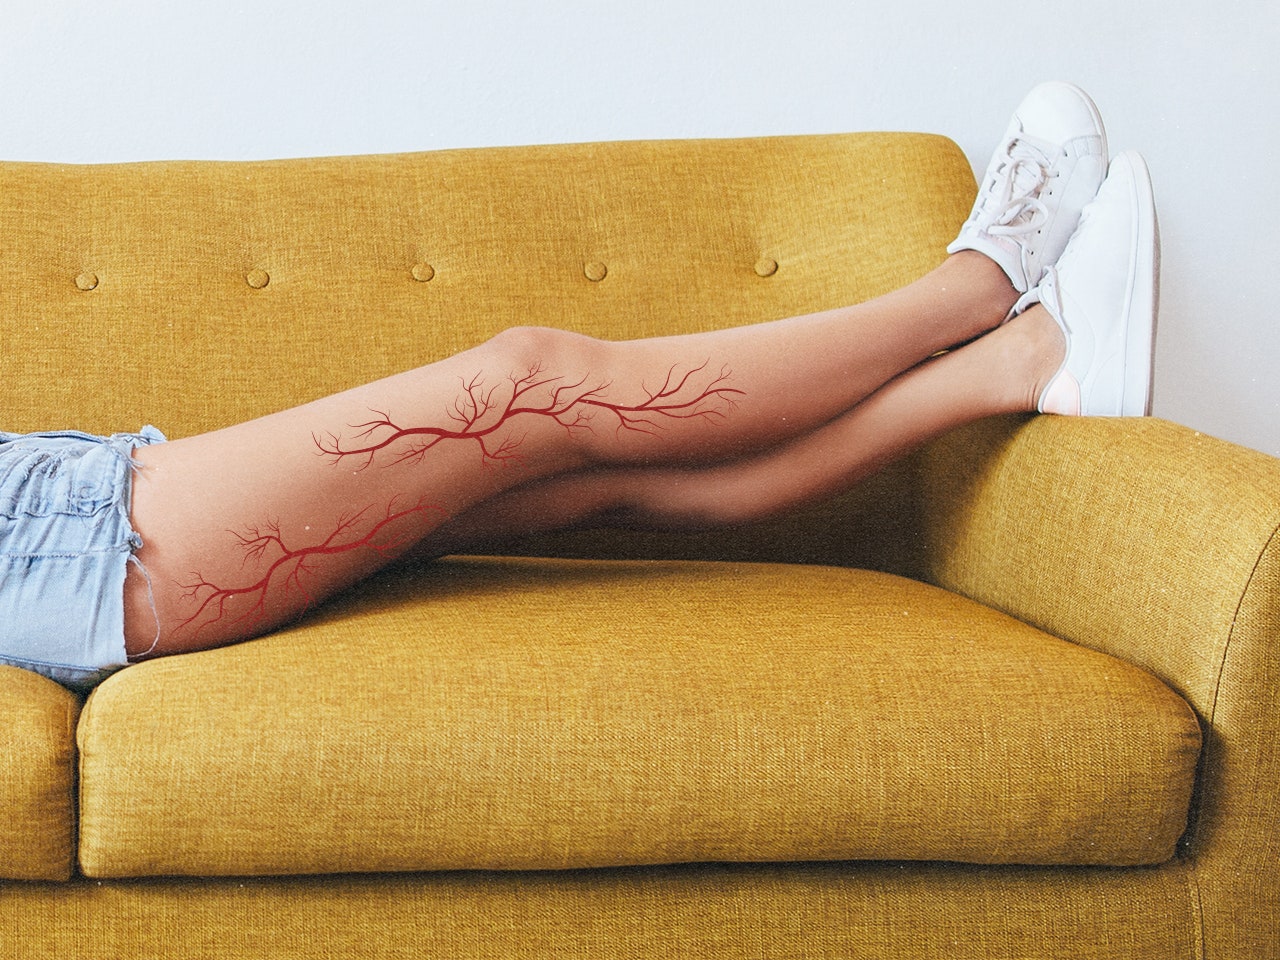 Menopause and Spider Veins: The Connection